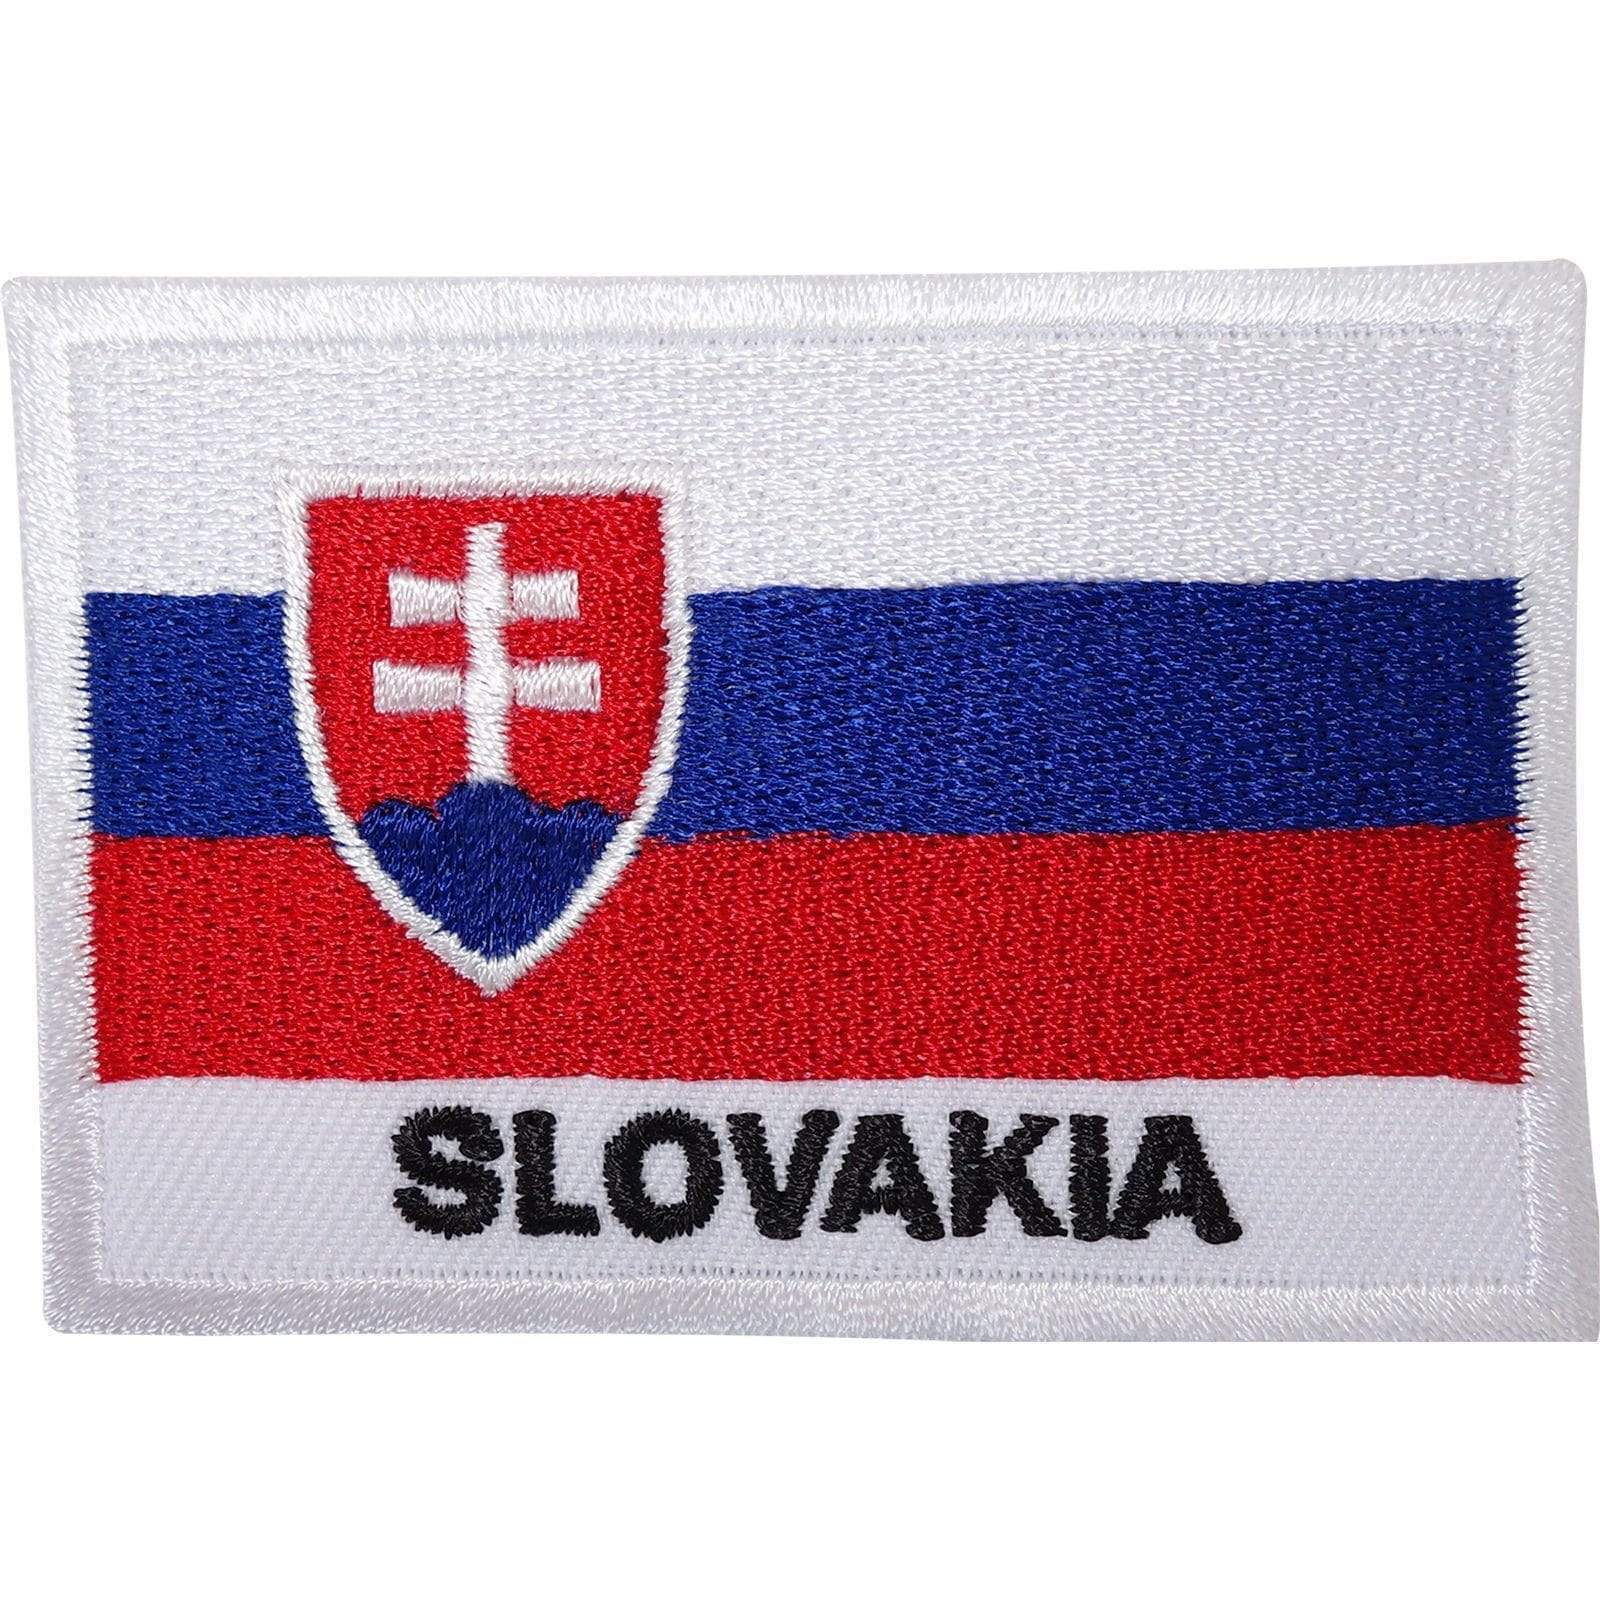 Slovakia Flag Embroidered Sew On Patch Slovakian Shirt Clothes Embroidery Badge